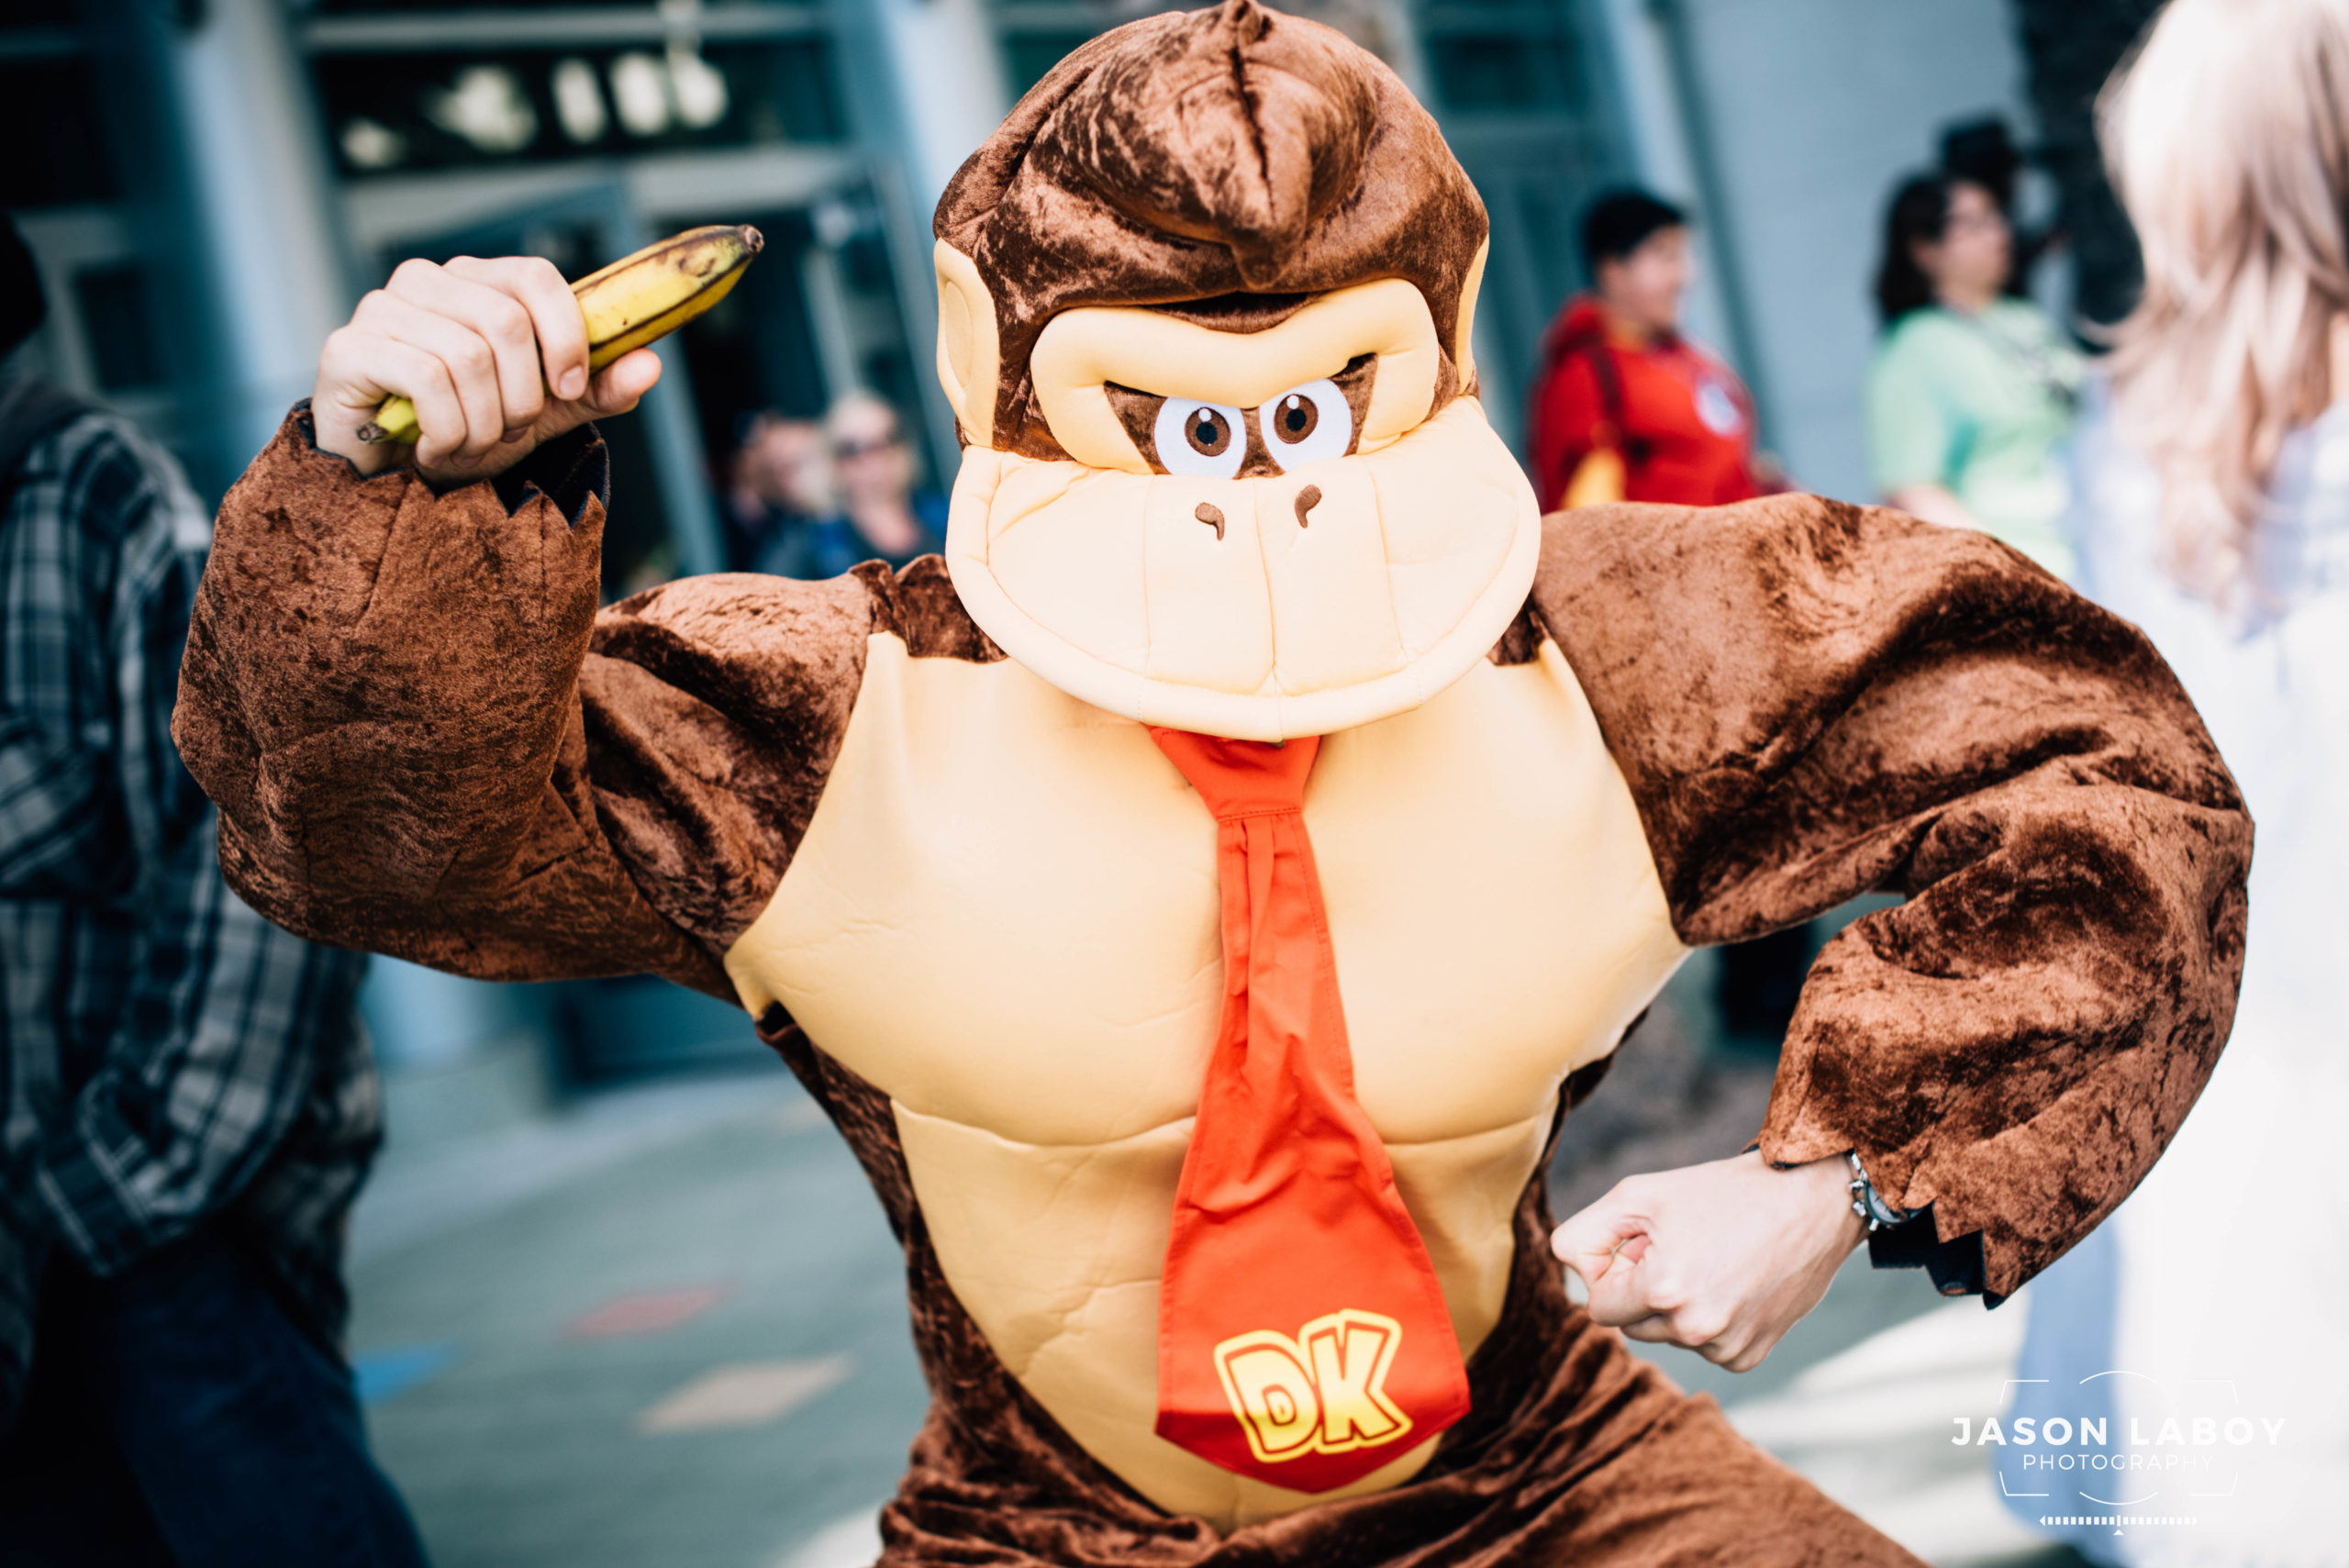 The Best Cosplay From WonderCon 2018